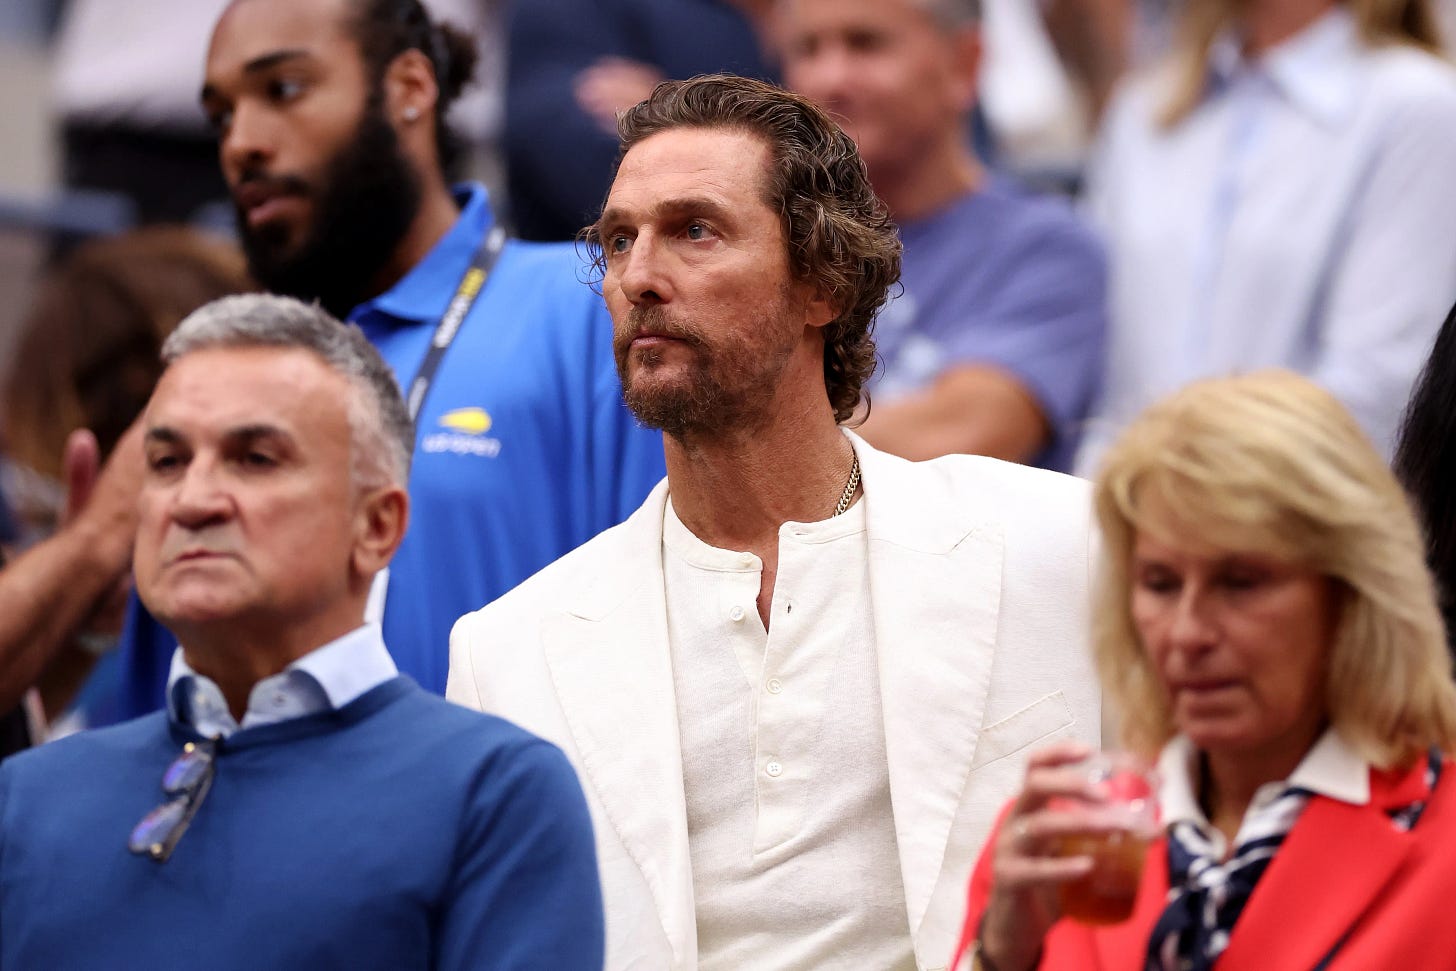 McConaughey is firmly in the Djokovic camp, sitting a row behind the player's parents